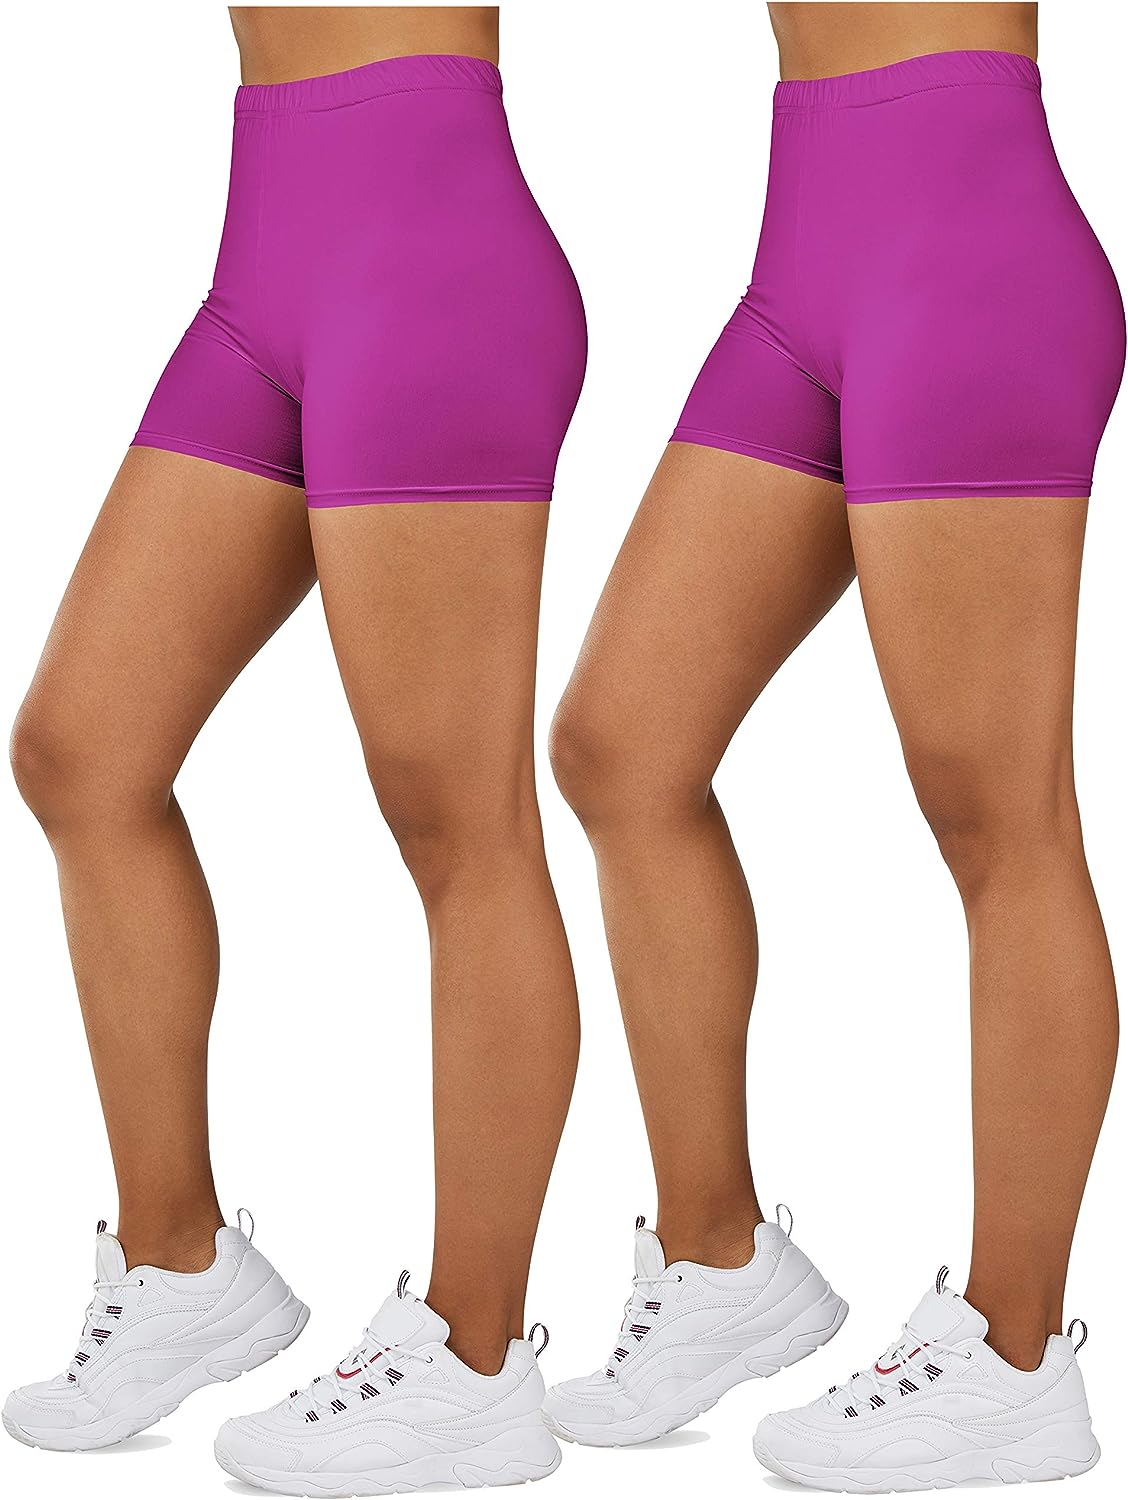 Gilbins 2 Pack Women's Seamless Stretch Yoga Exercise Shorts 19 Length